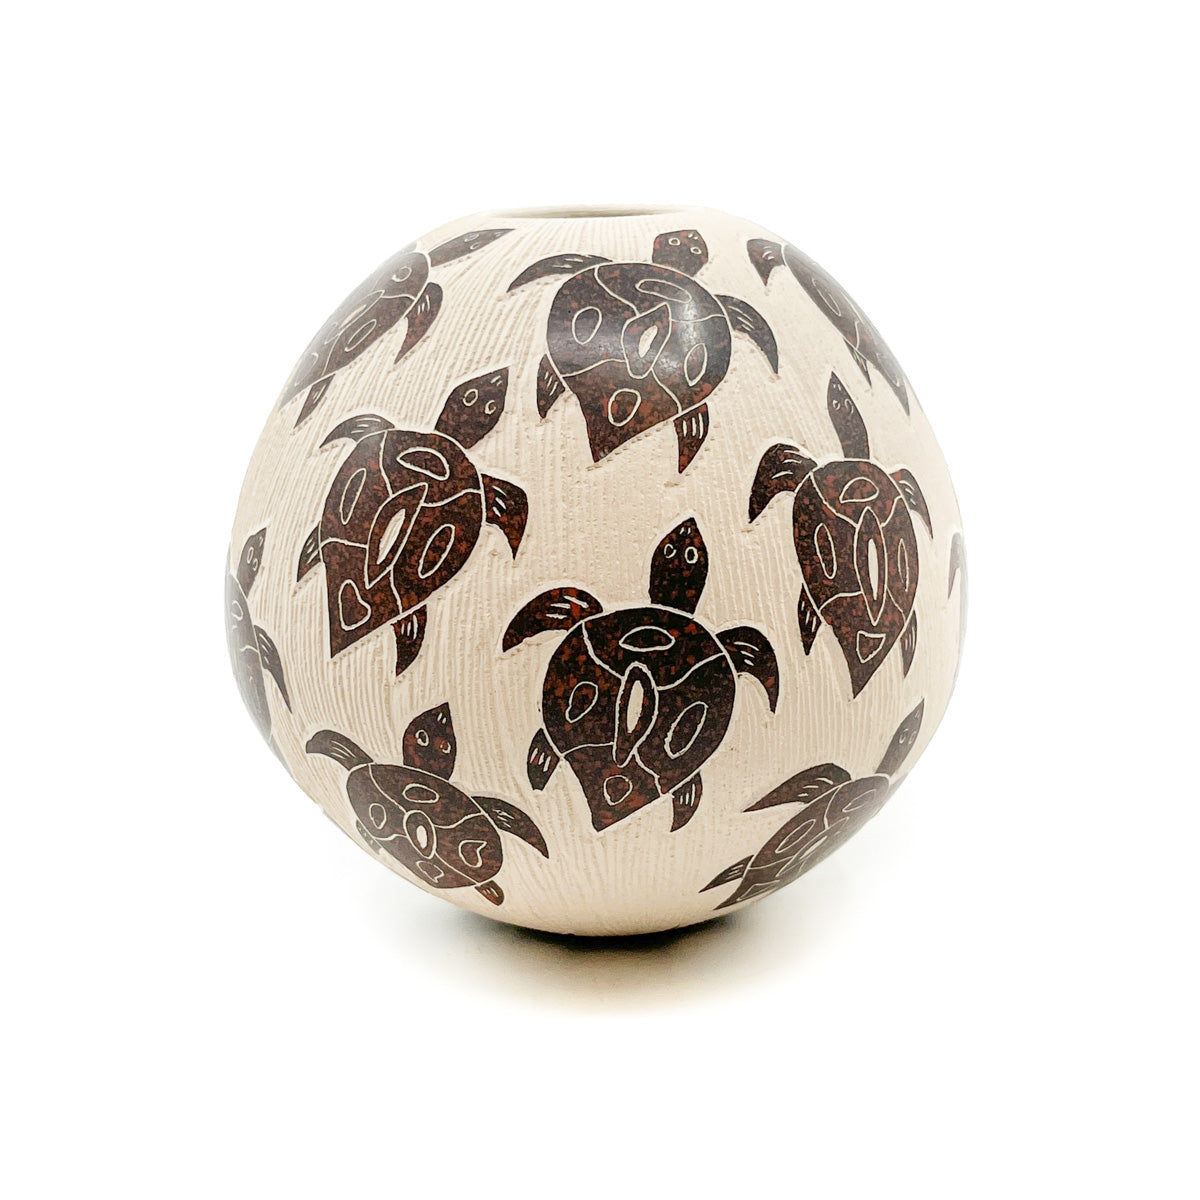 Sgraffito and Painted Turtle Pot